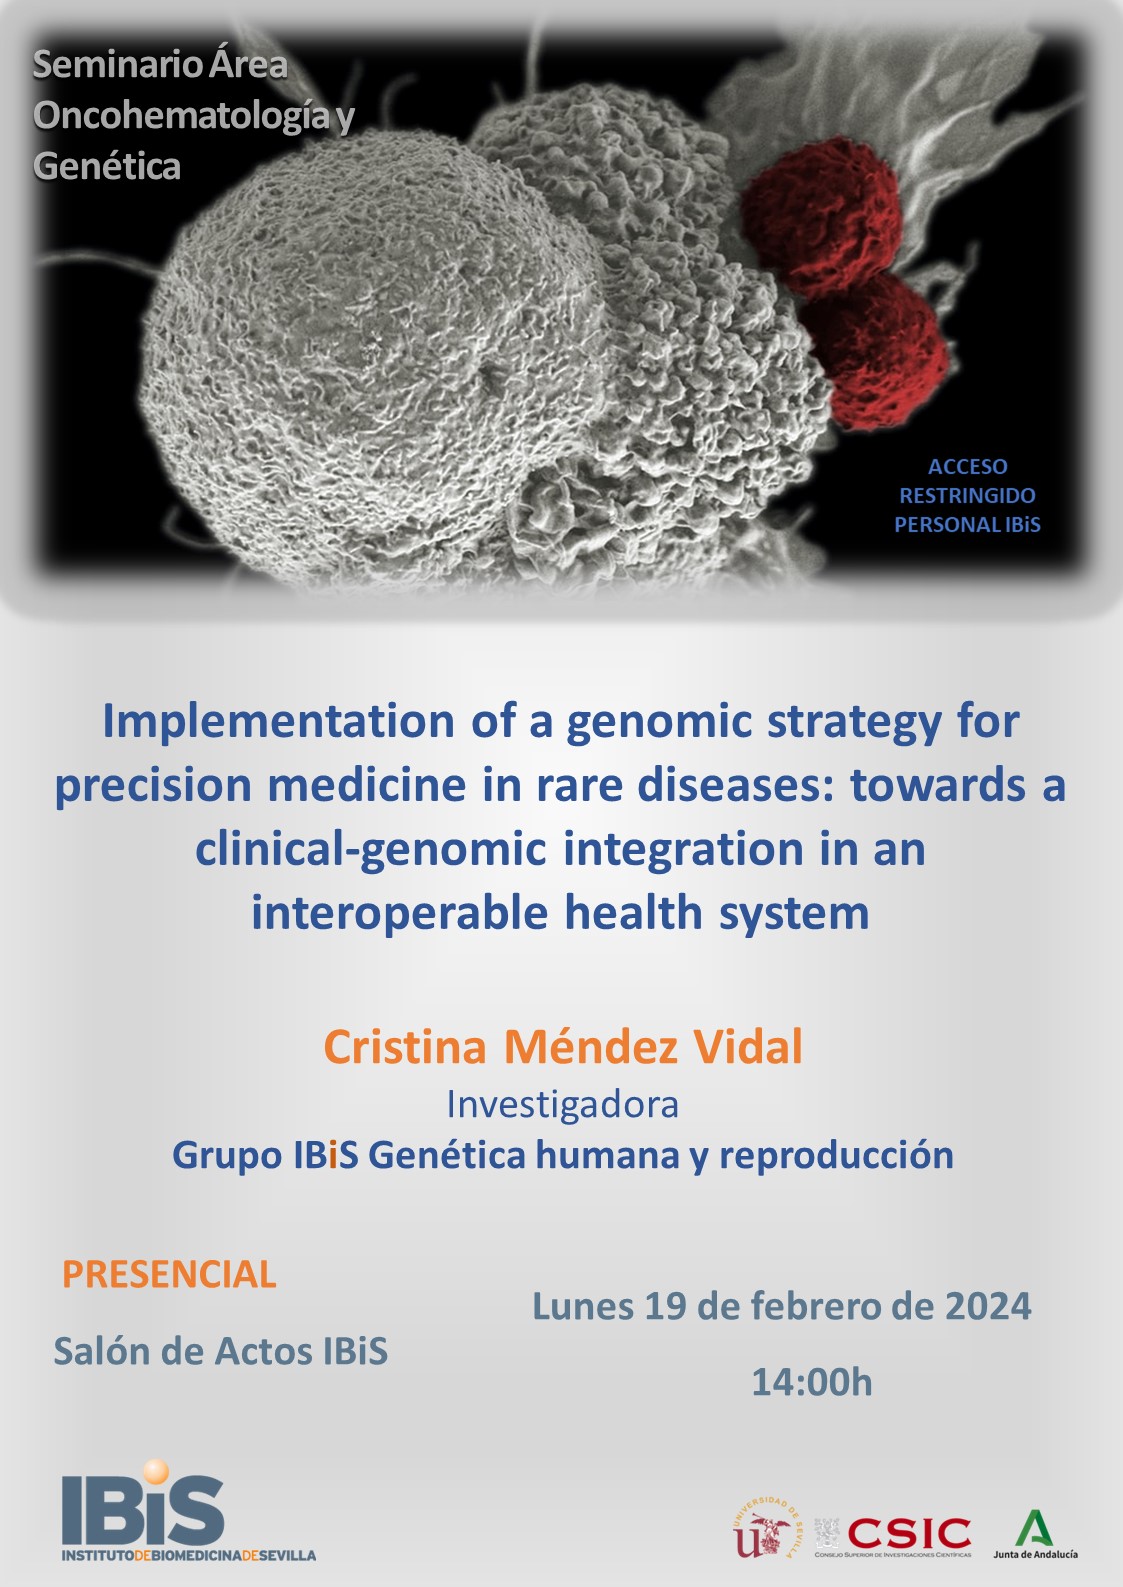 Poster: Implementation of a genomic strategy for precision medicine in rare diseases: towards a clinical-genomic integration in an interoperable health system